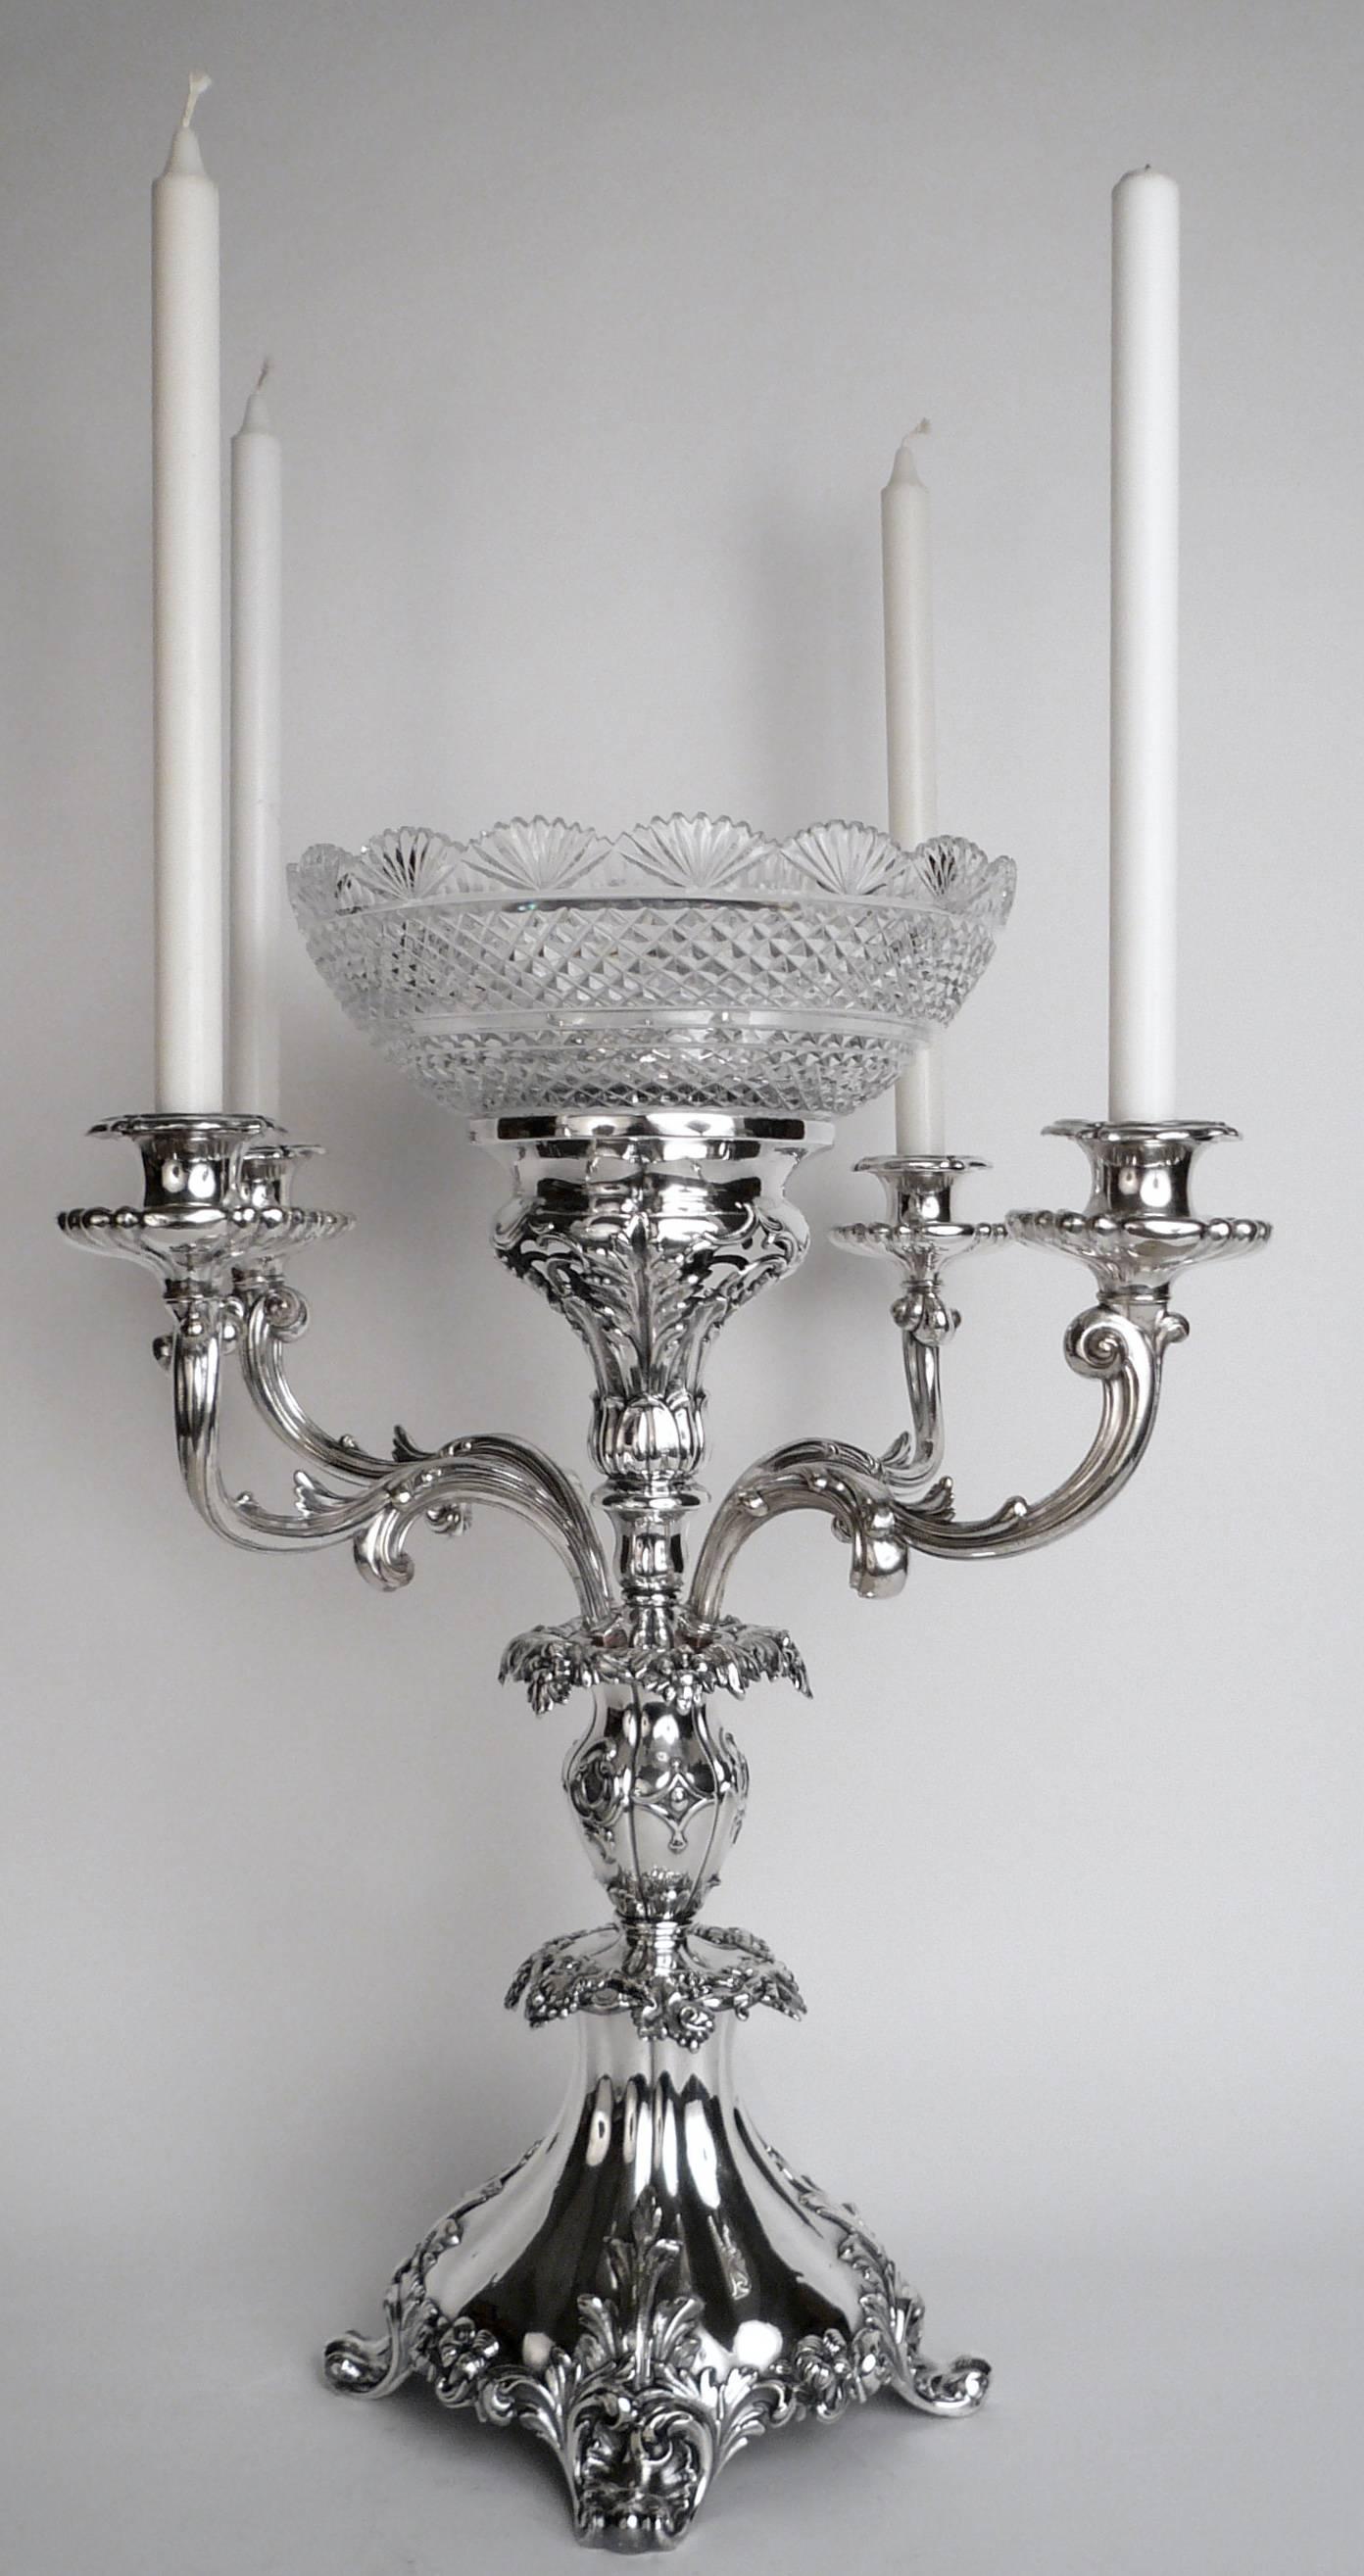 This impressive centerpiece features foliate, and vintage motifs, acanthus leaves, and scroll form feet.
The center bowl is beautifully cut and in excellent condition. Filled with fruit or flowers, this imposing epergne makes a grand statement.